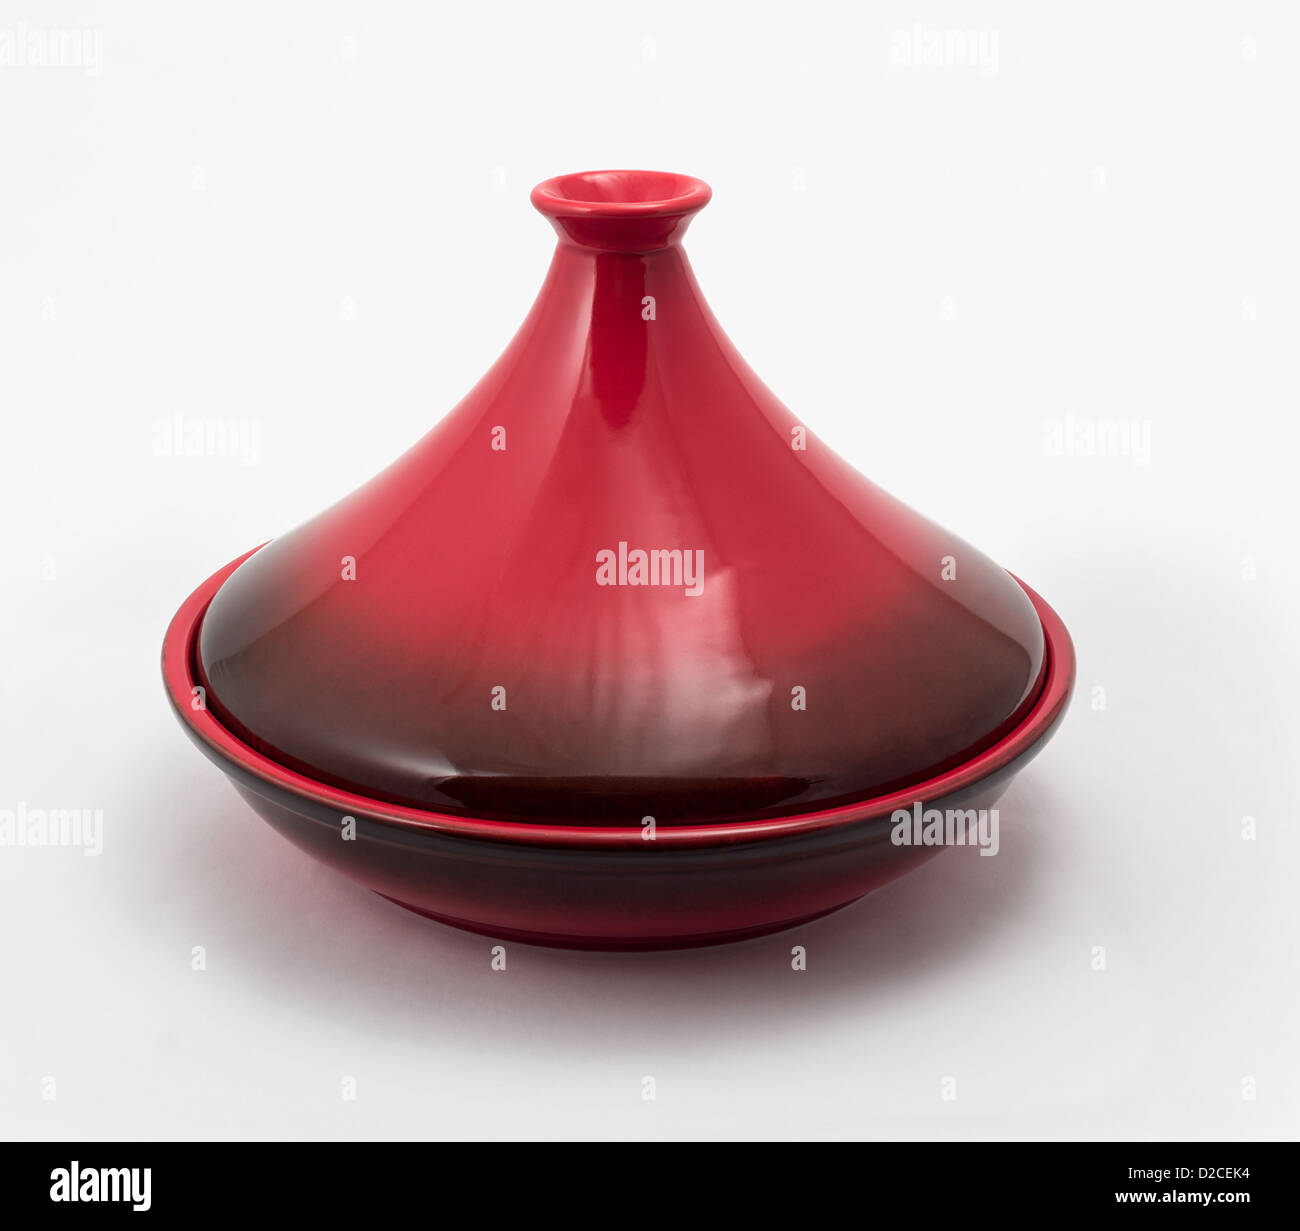 Tagine (Tajine) a type of cookware from Morocco, shown with lid on. Stock Photo